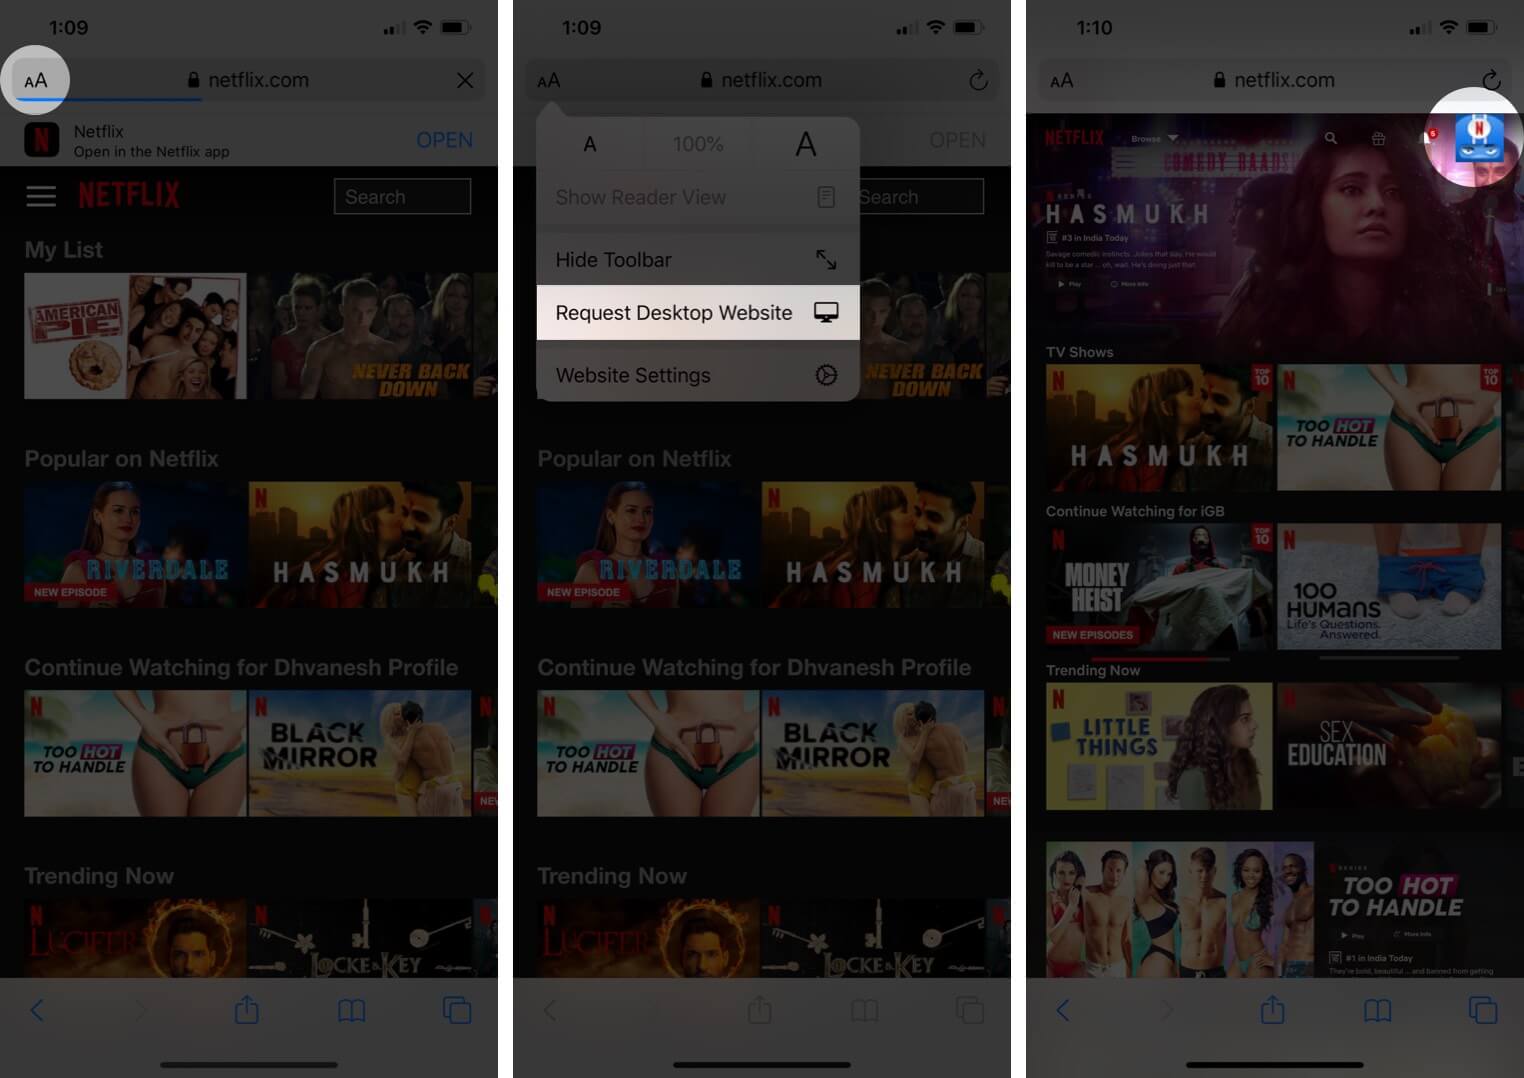 Tap on Request Desktop Website and Then Tap on Netflix Account